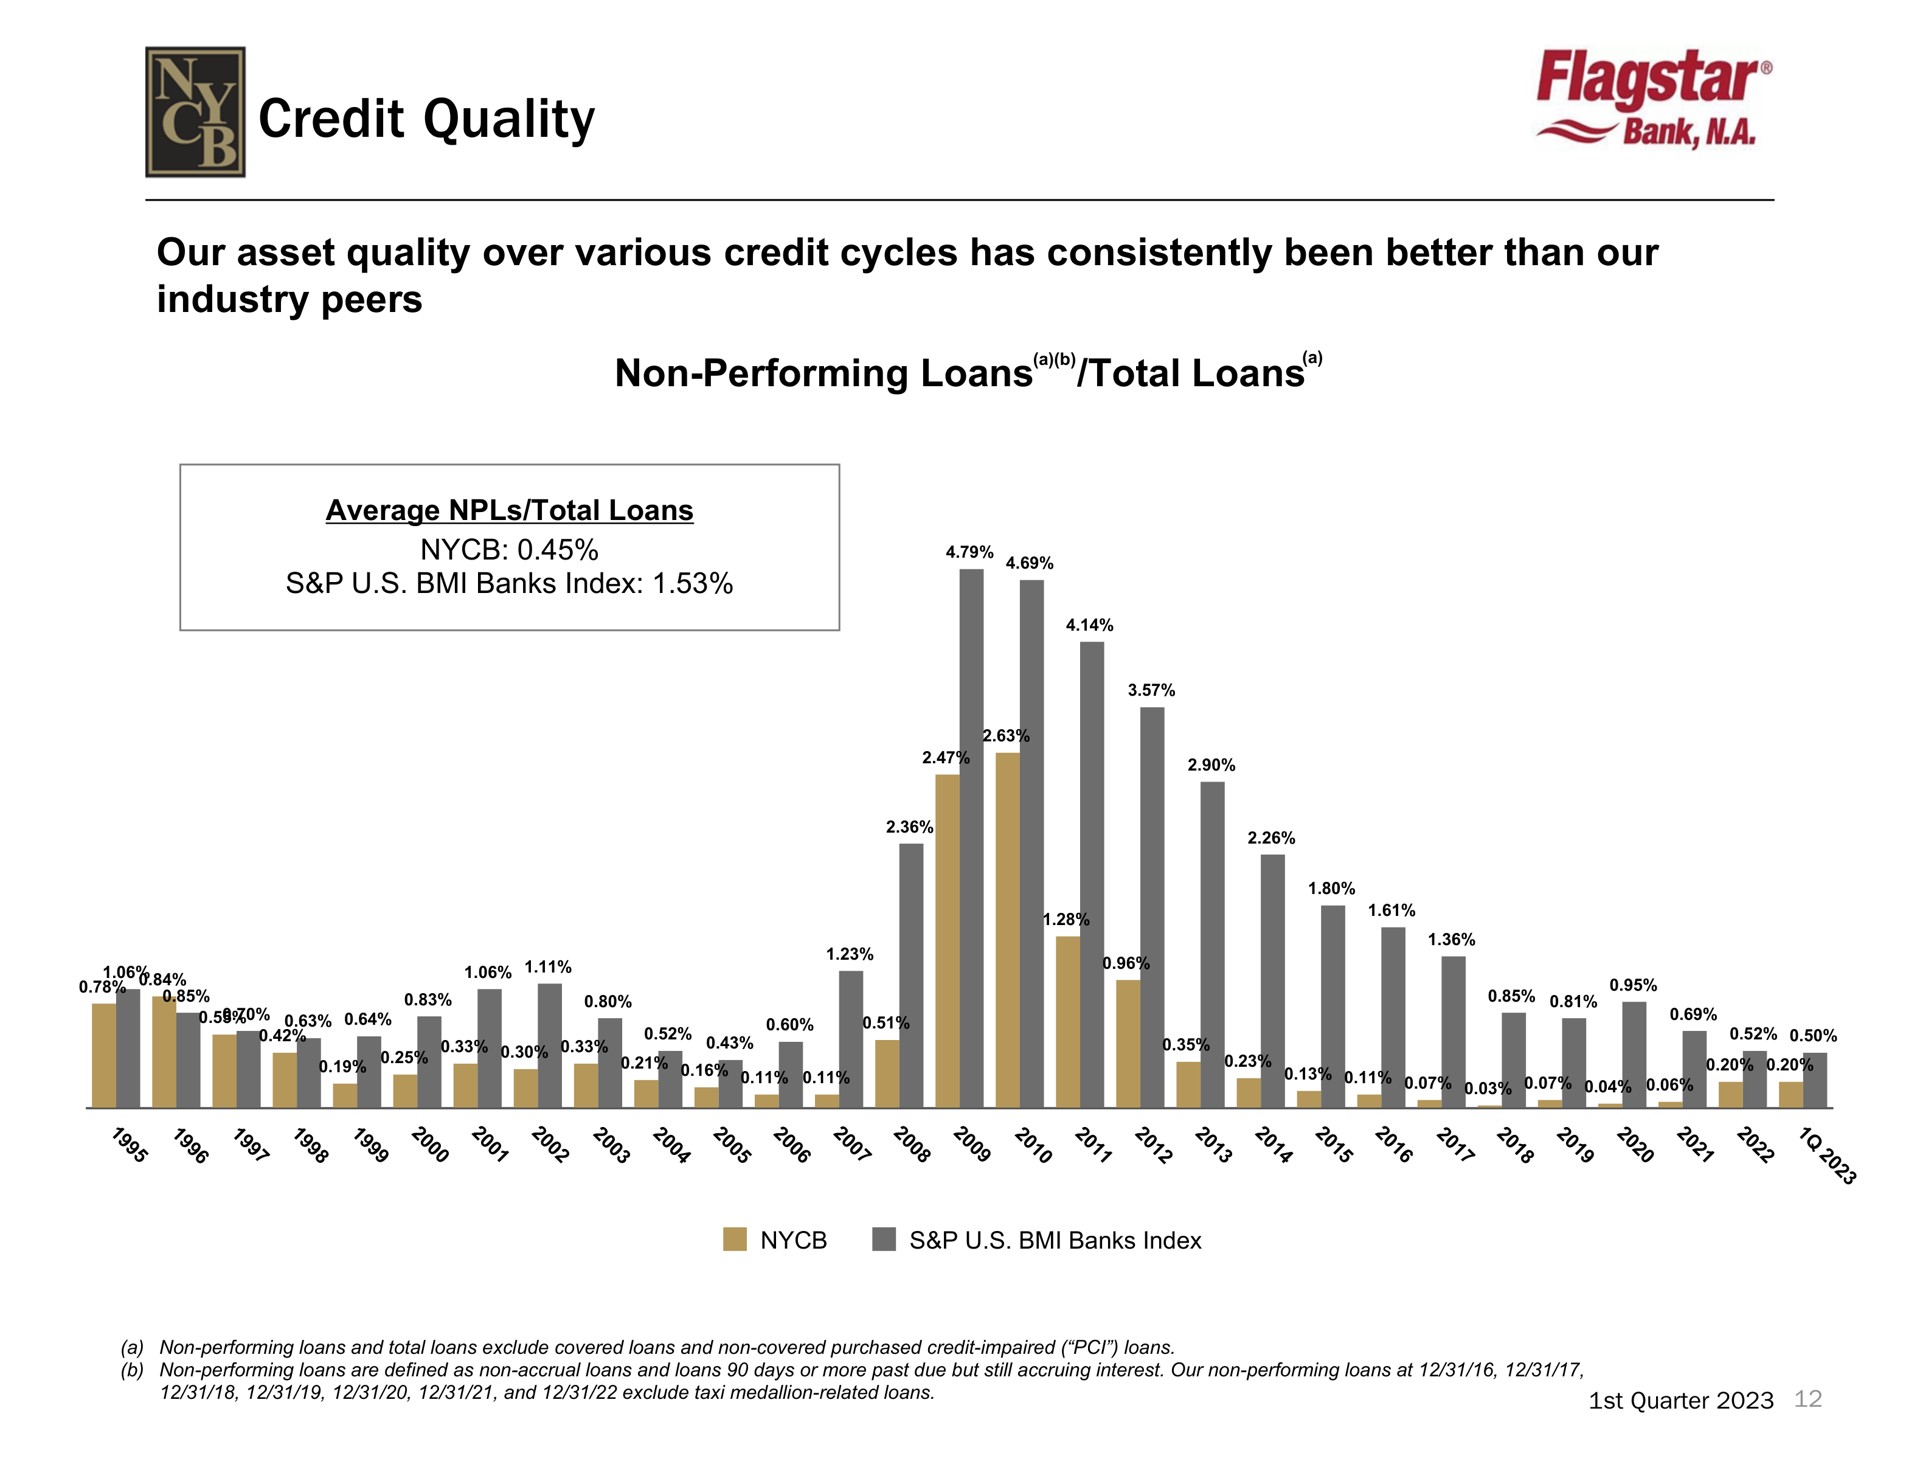 credit quality non performing loans total loans | New York Community Bancorp